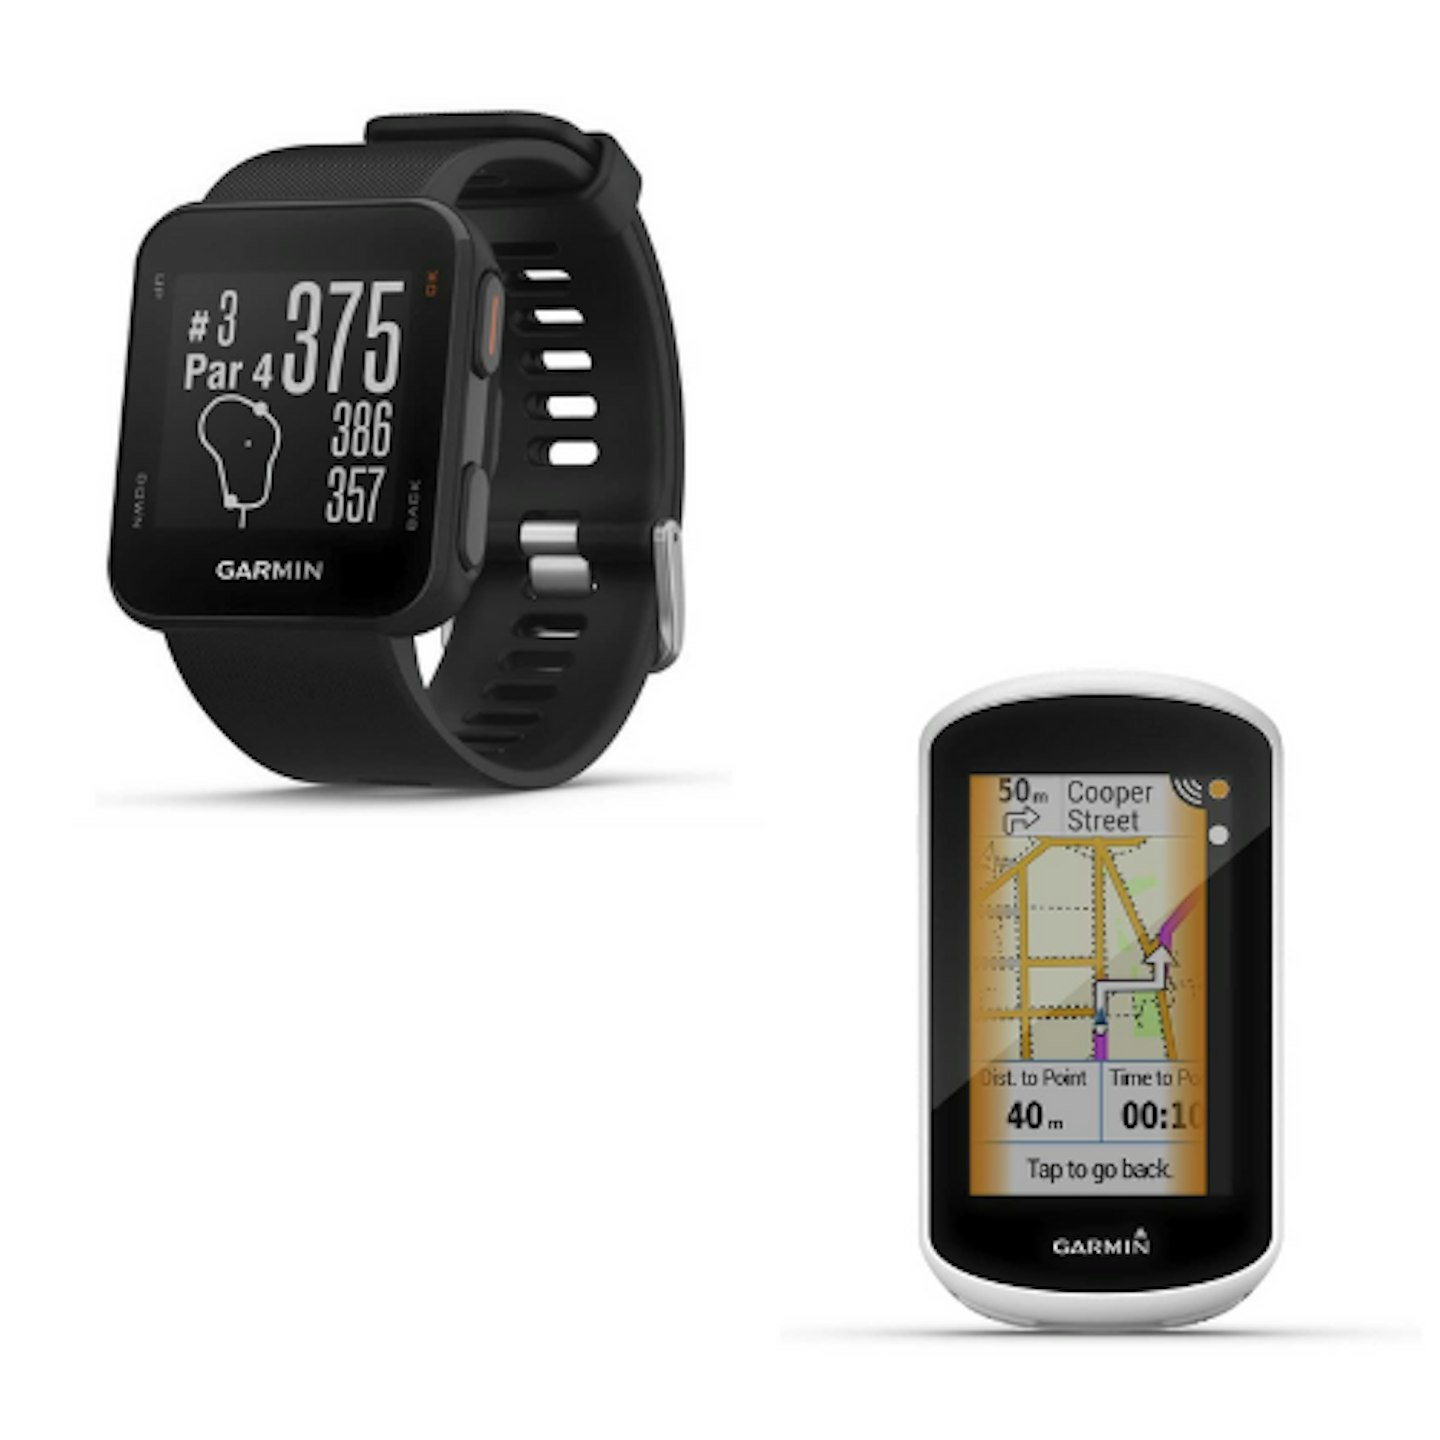 Up to 40% off Garmin Watches, Weareables, Dash Cams